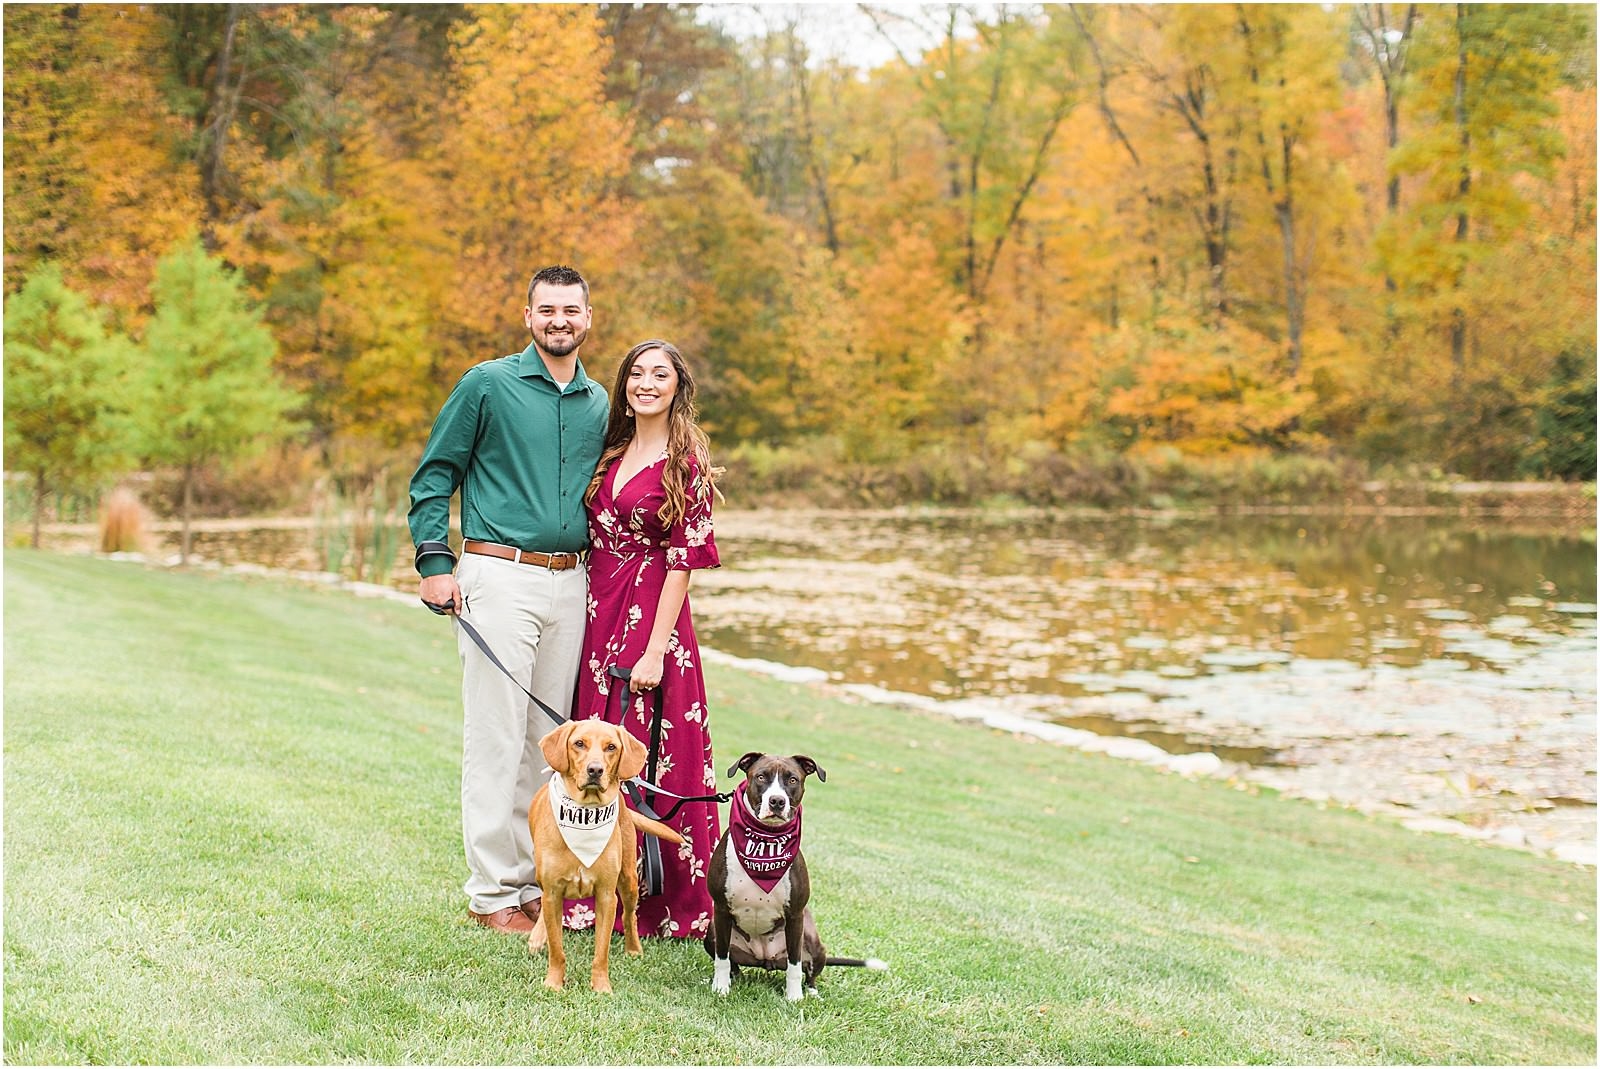 A Fall Oliver Winery Engagement Session | Sally and Andrew | Bret and Brandie Photography 0003.jpg